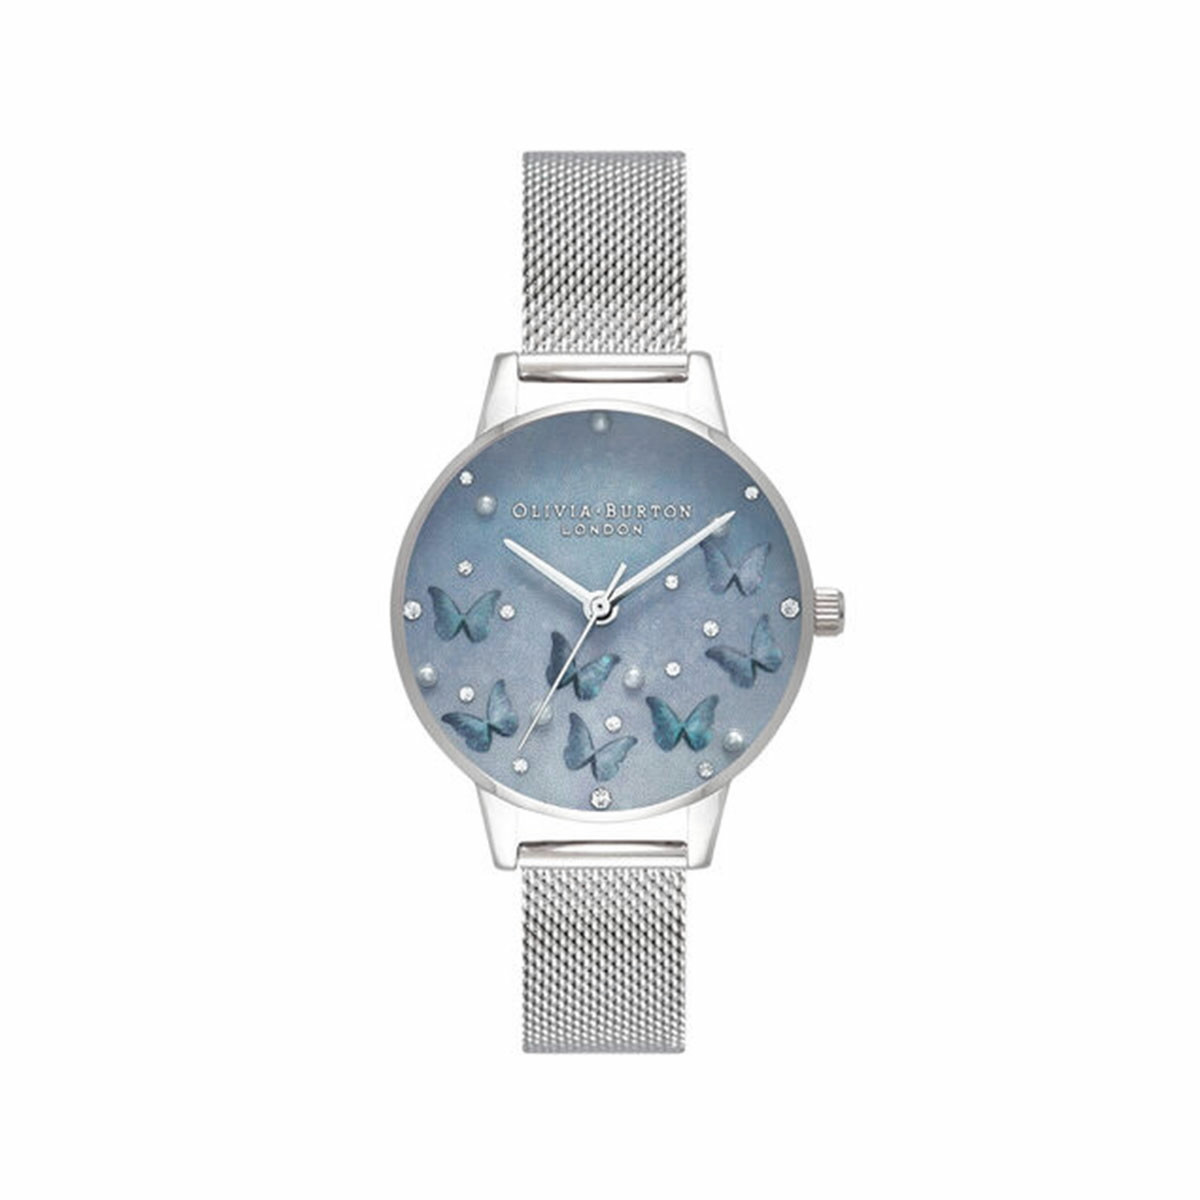 SILVER MESH WATCH WITH PALE BLUE MOTHER-OF-PEARL MIDI DIAL AND SYNTHETIC PEARL